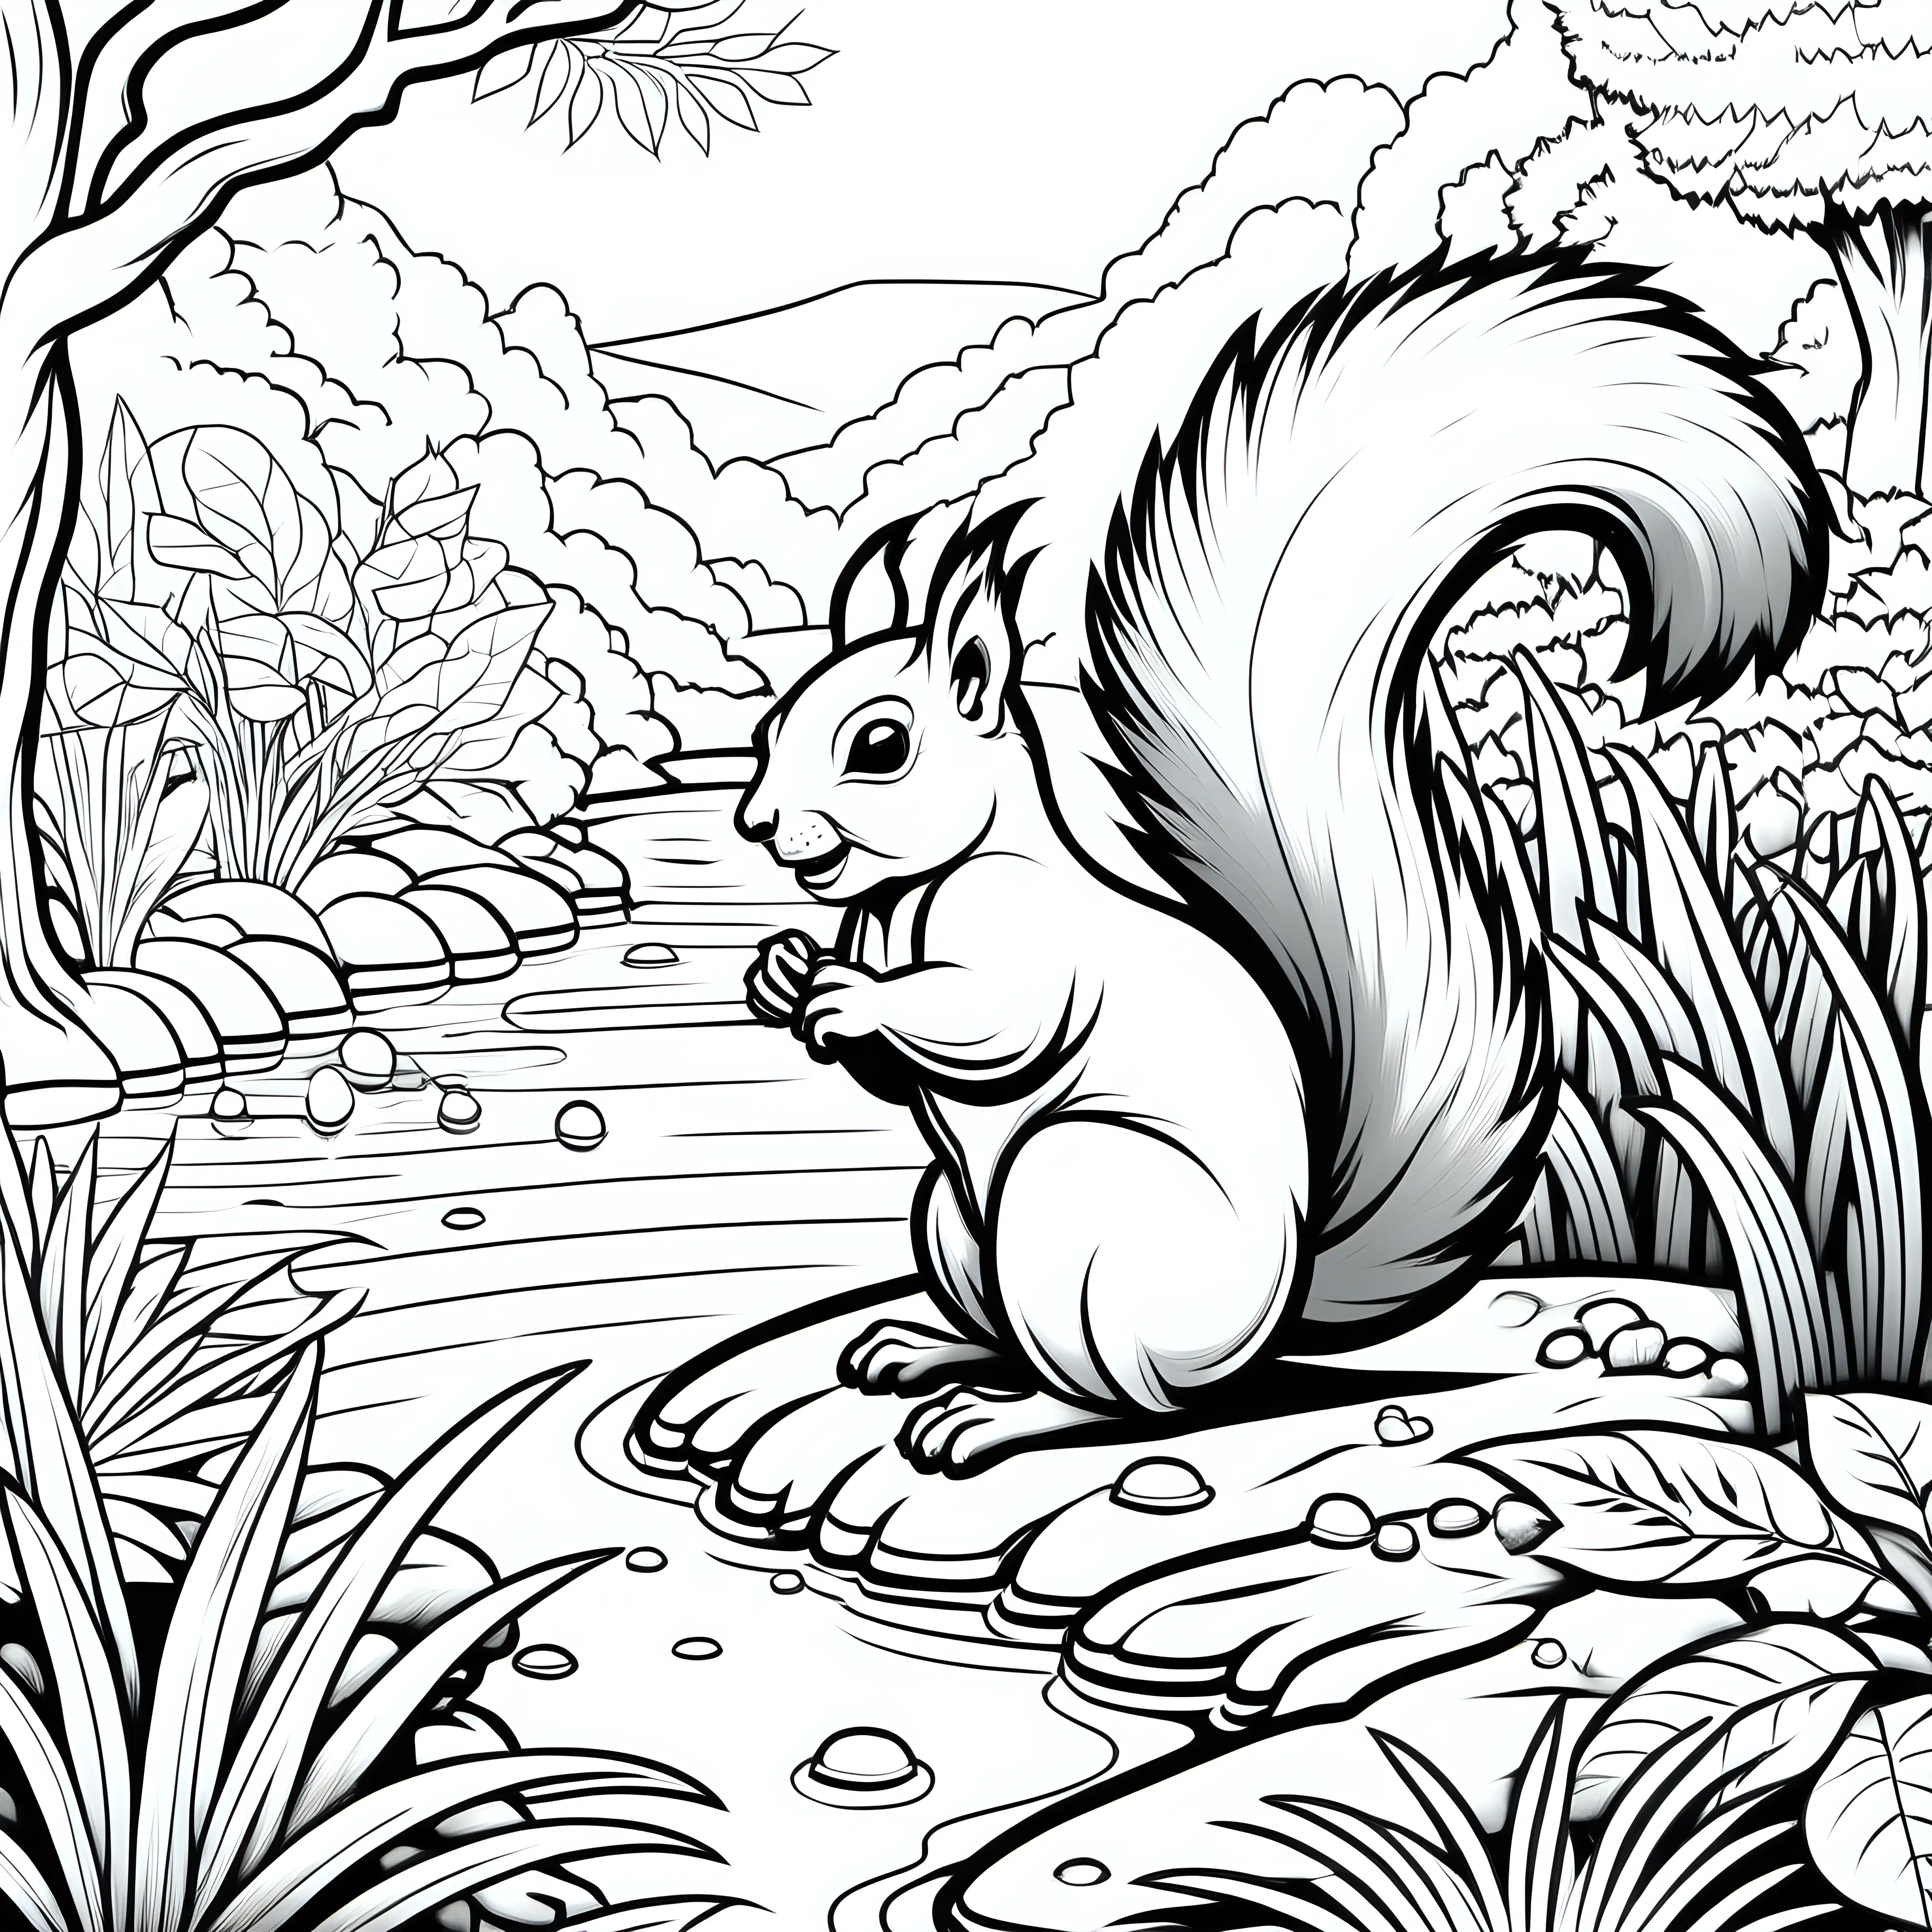 Squirrel in Garden of Eden Coloring Page Serene Wildlife by the Water